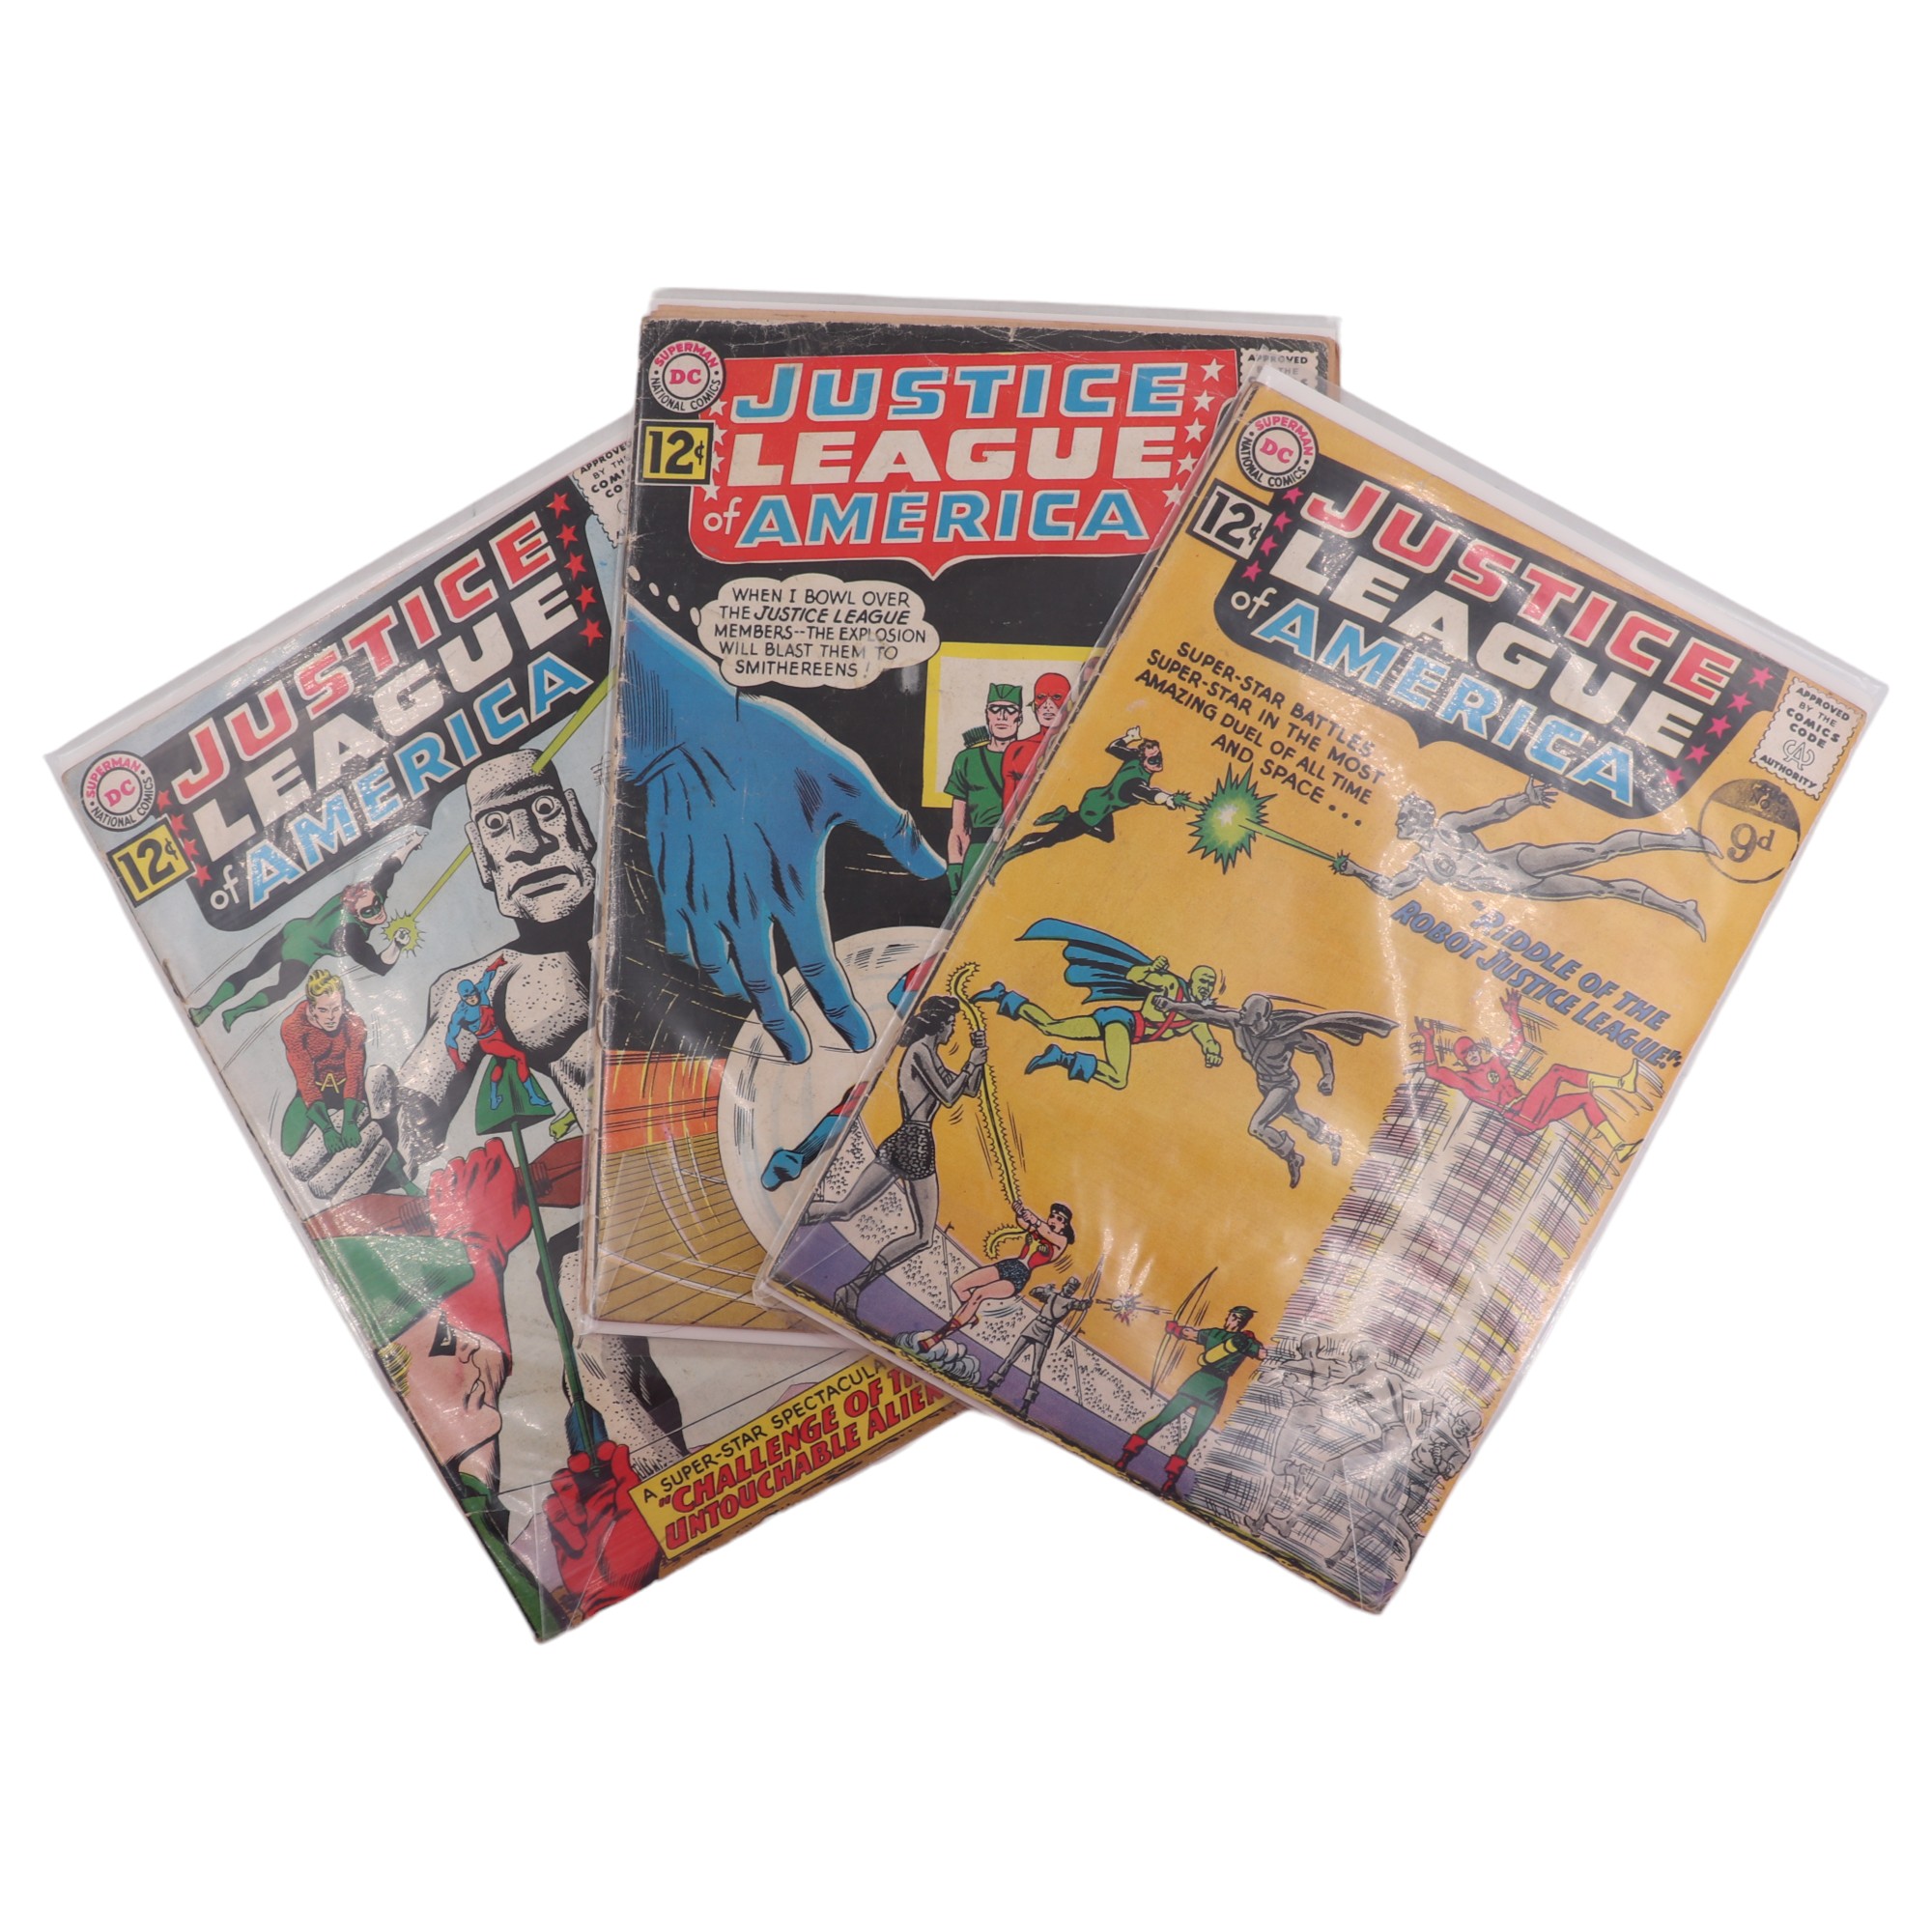 A large quantity of 1960s DC Justice League of America comic books, issue numbers 3 to 36 (not - Image 3 of 4